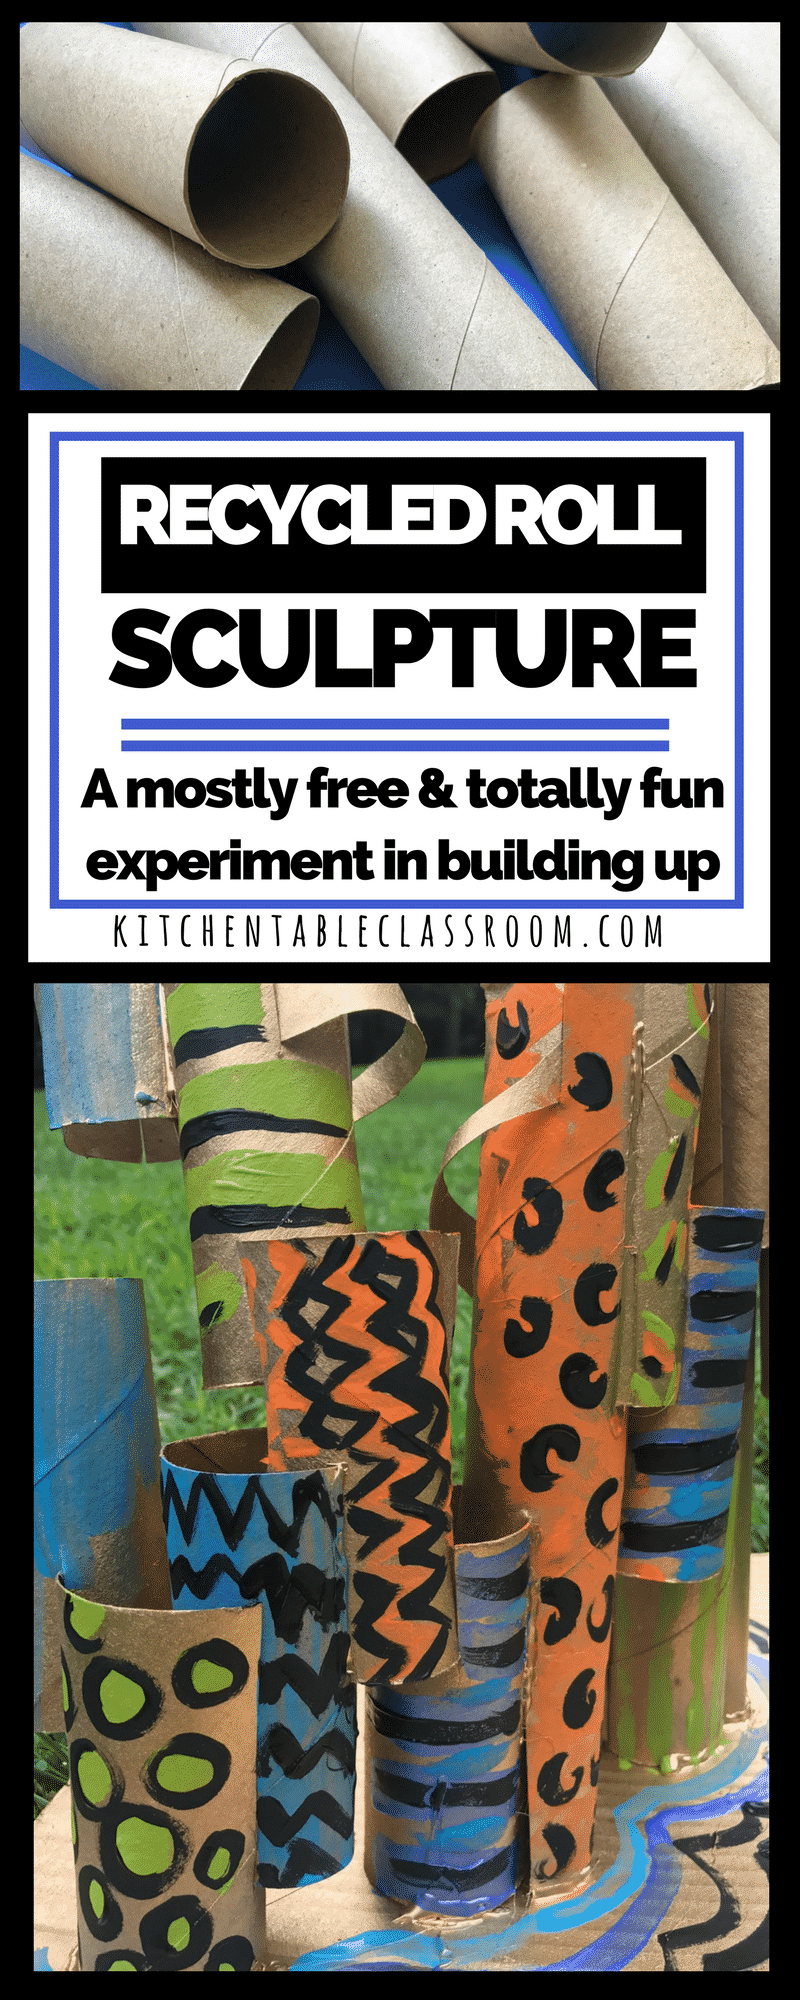 Free art experiences are hard to beat. Using toilet paper cardboard tubes to create a recycled sculpture is a fun and easy way to learn about building up.